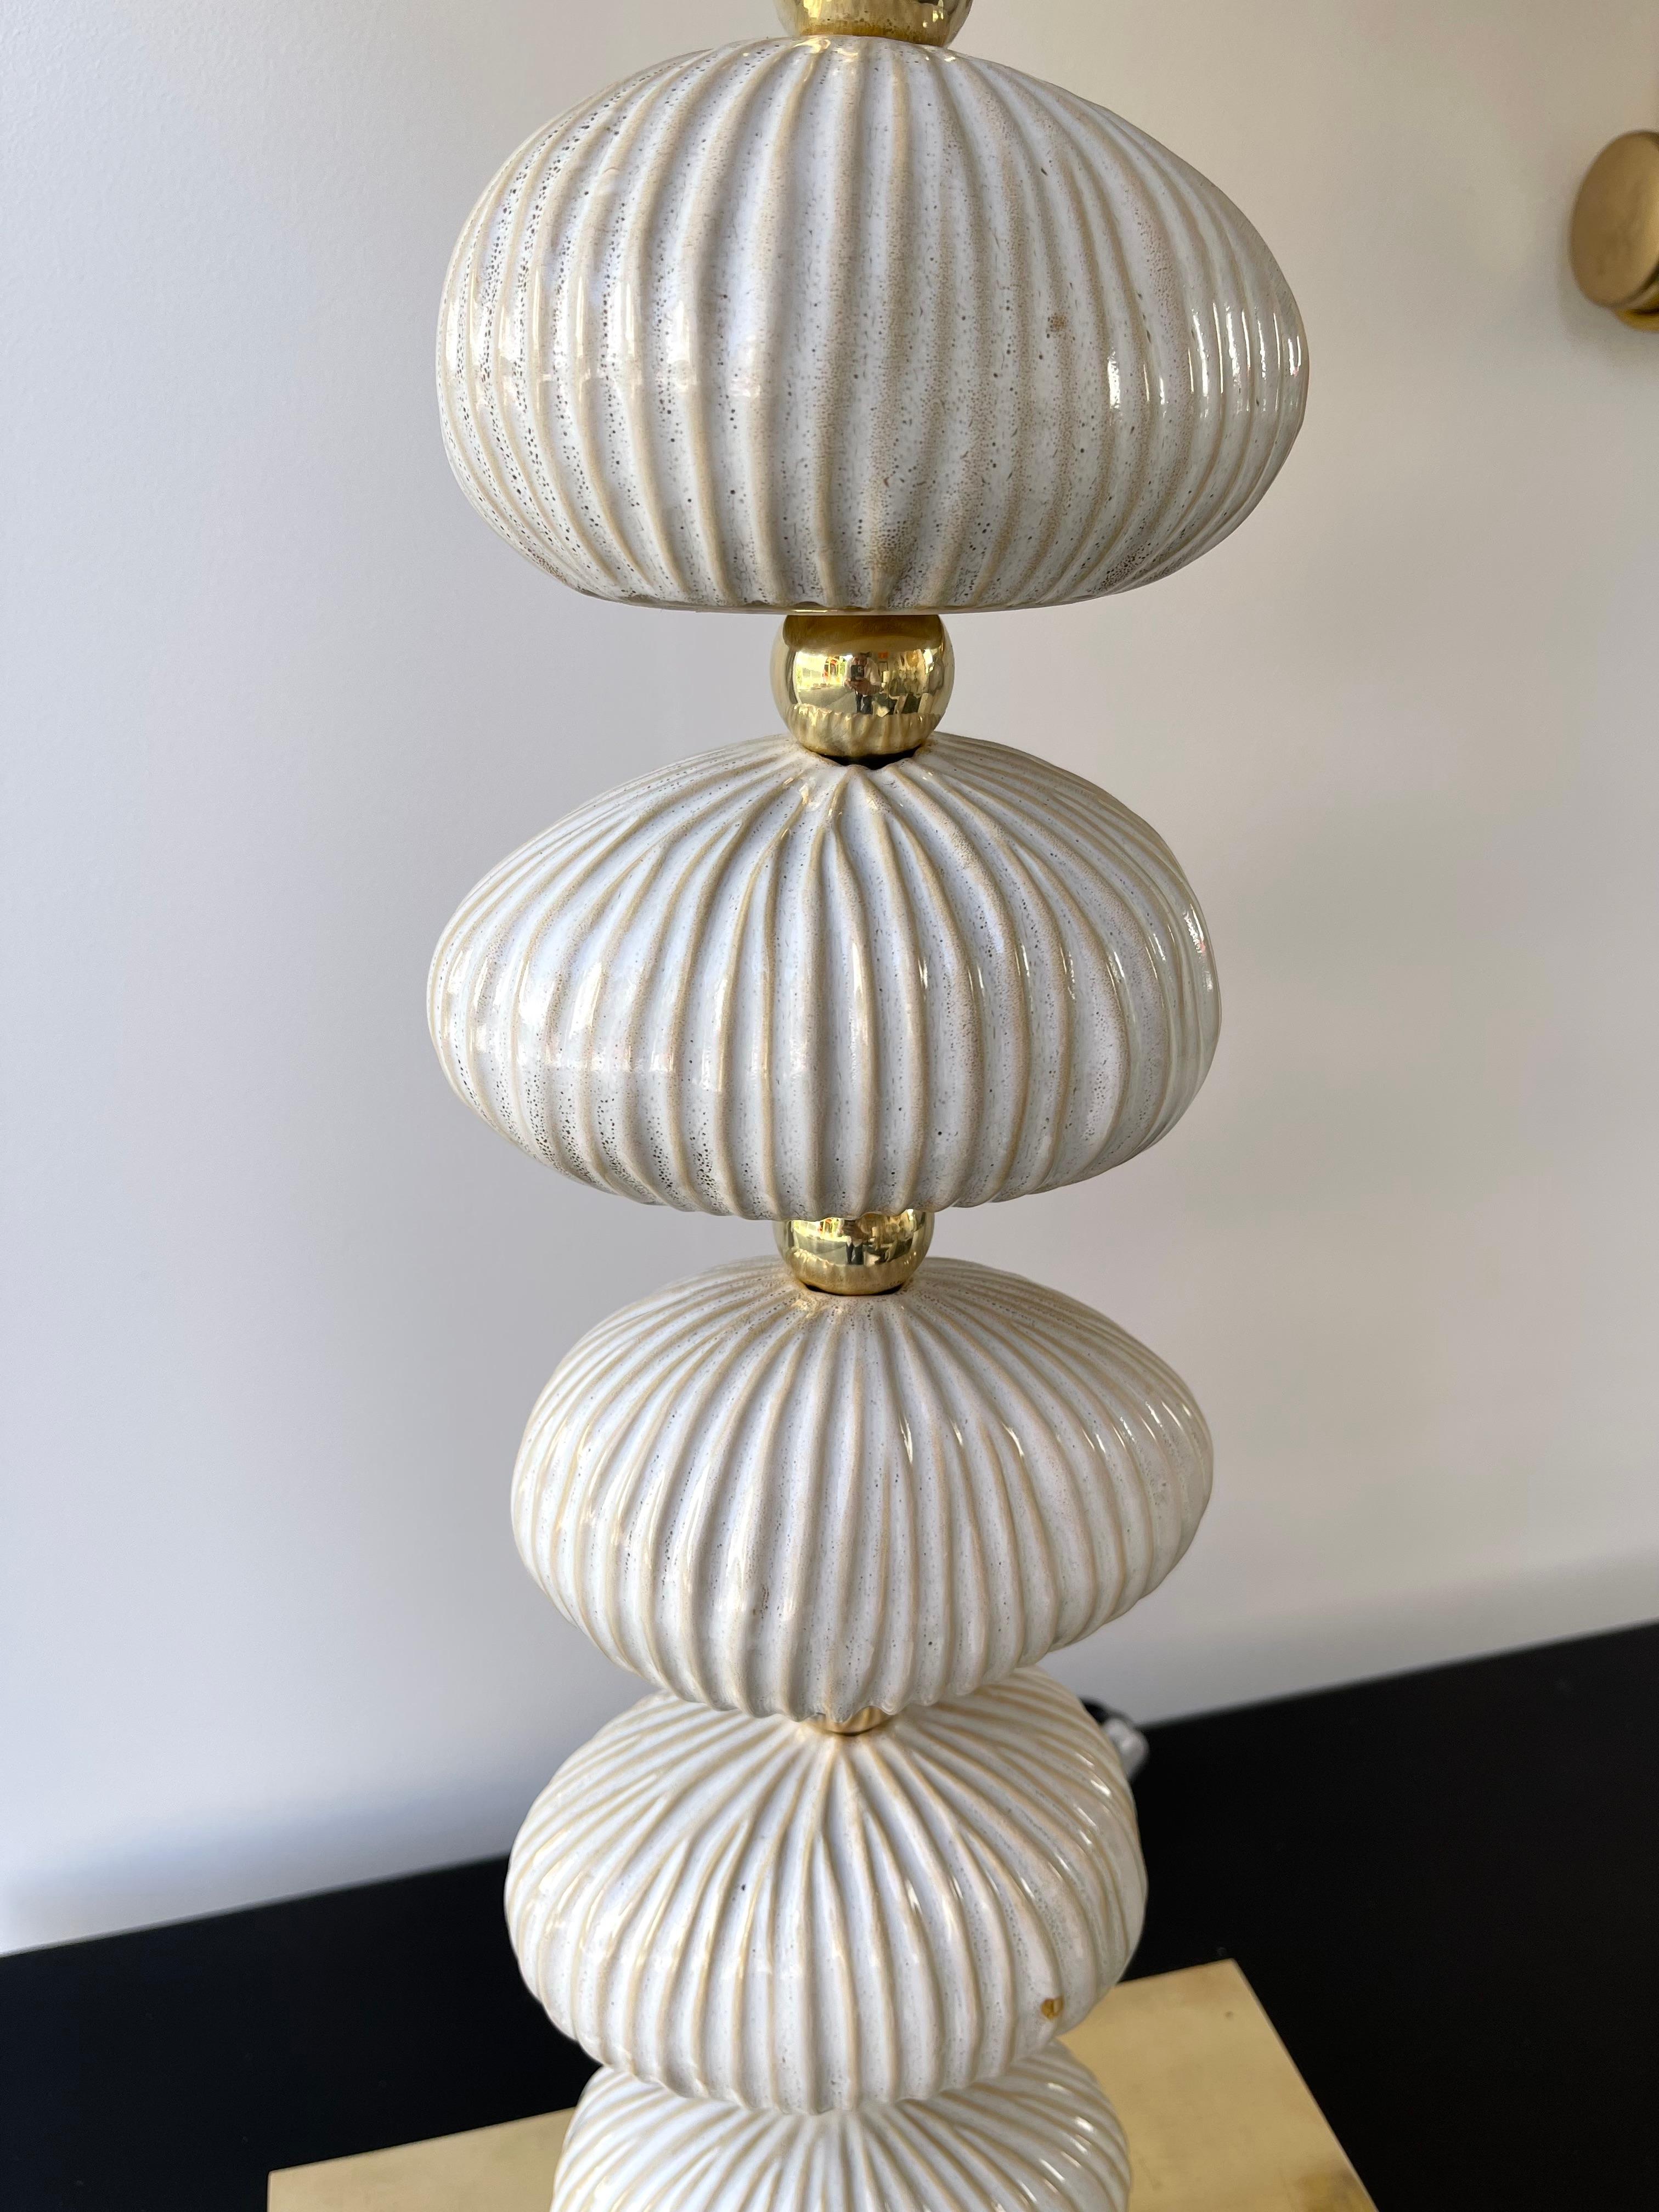 Pair of natural color and shape ceramic terracotta in the mood of sea shell fossil and brass table or bedside lamps. Contemporary work from a small artisanal italian design workshop.

Measurements indicated in description with demo shades
Demo